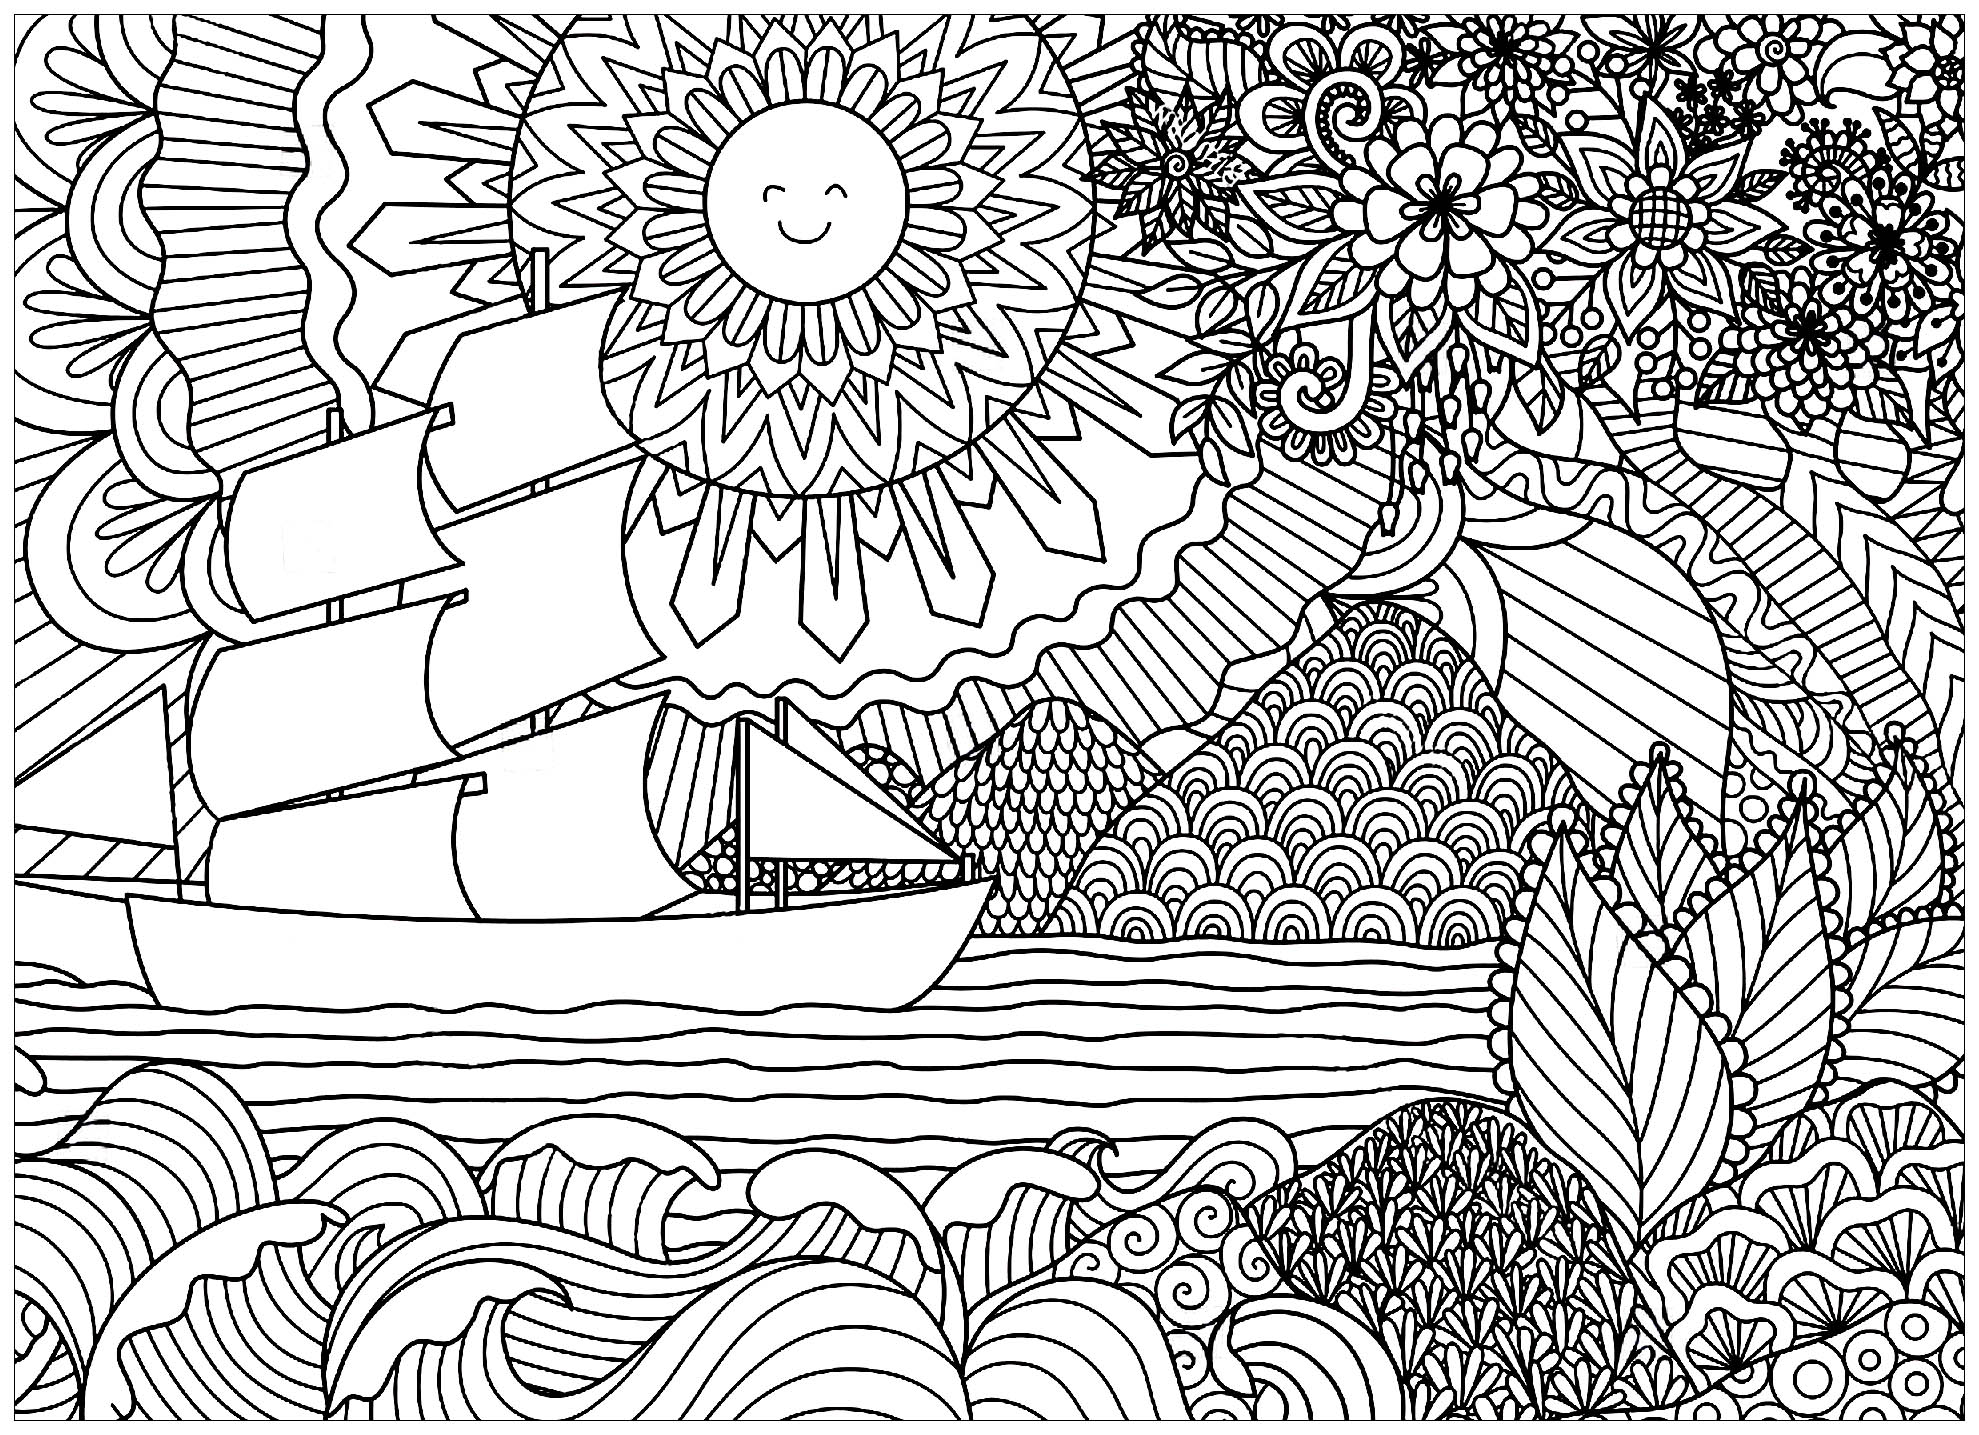 Coloring adult seascape with sun and boat